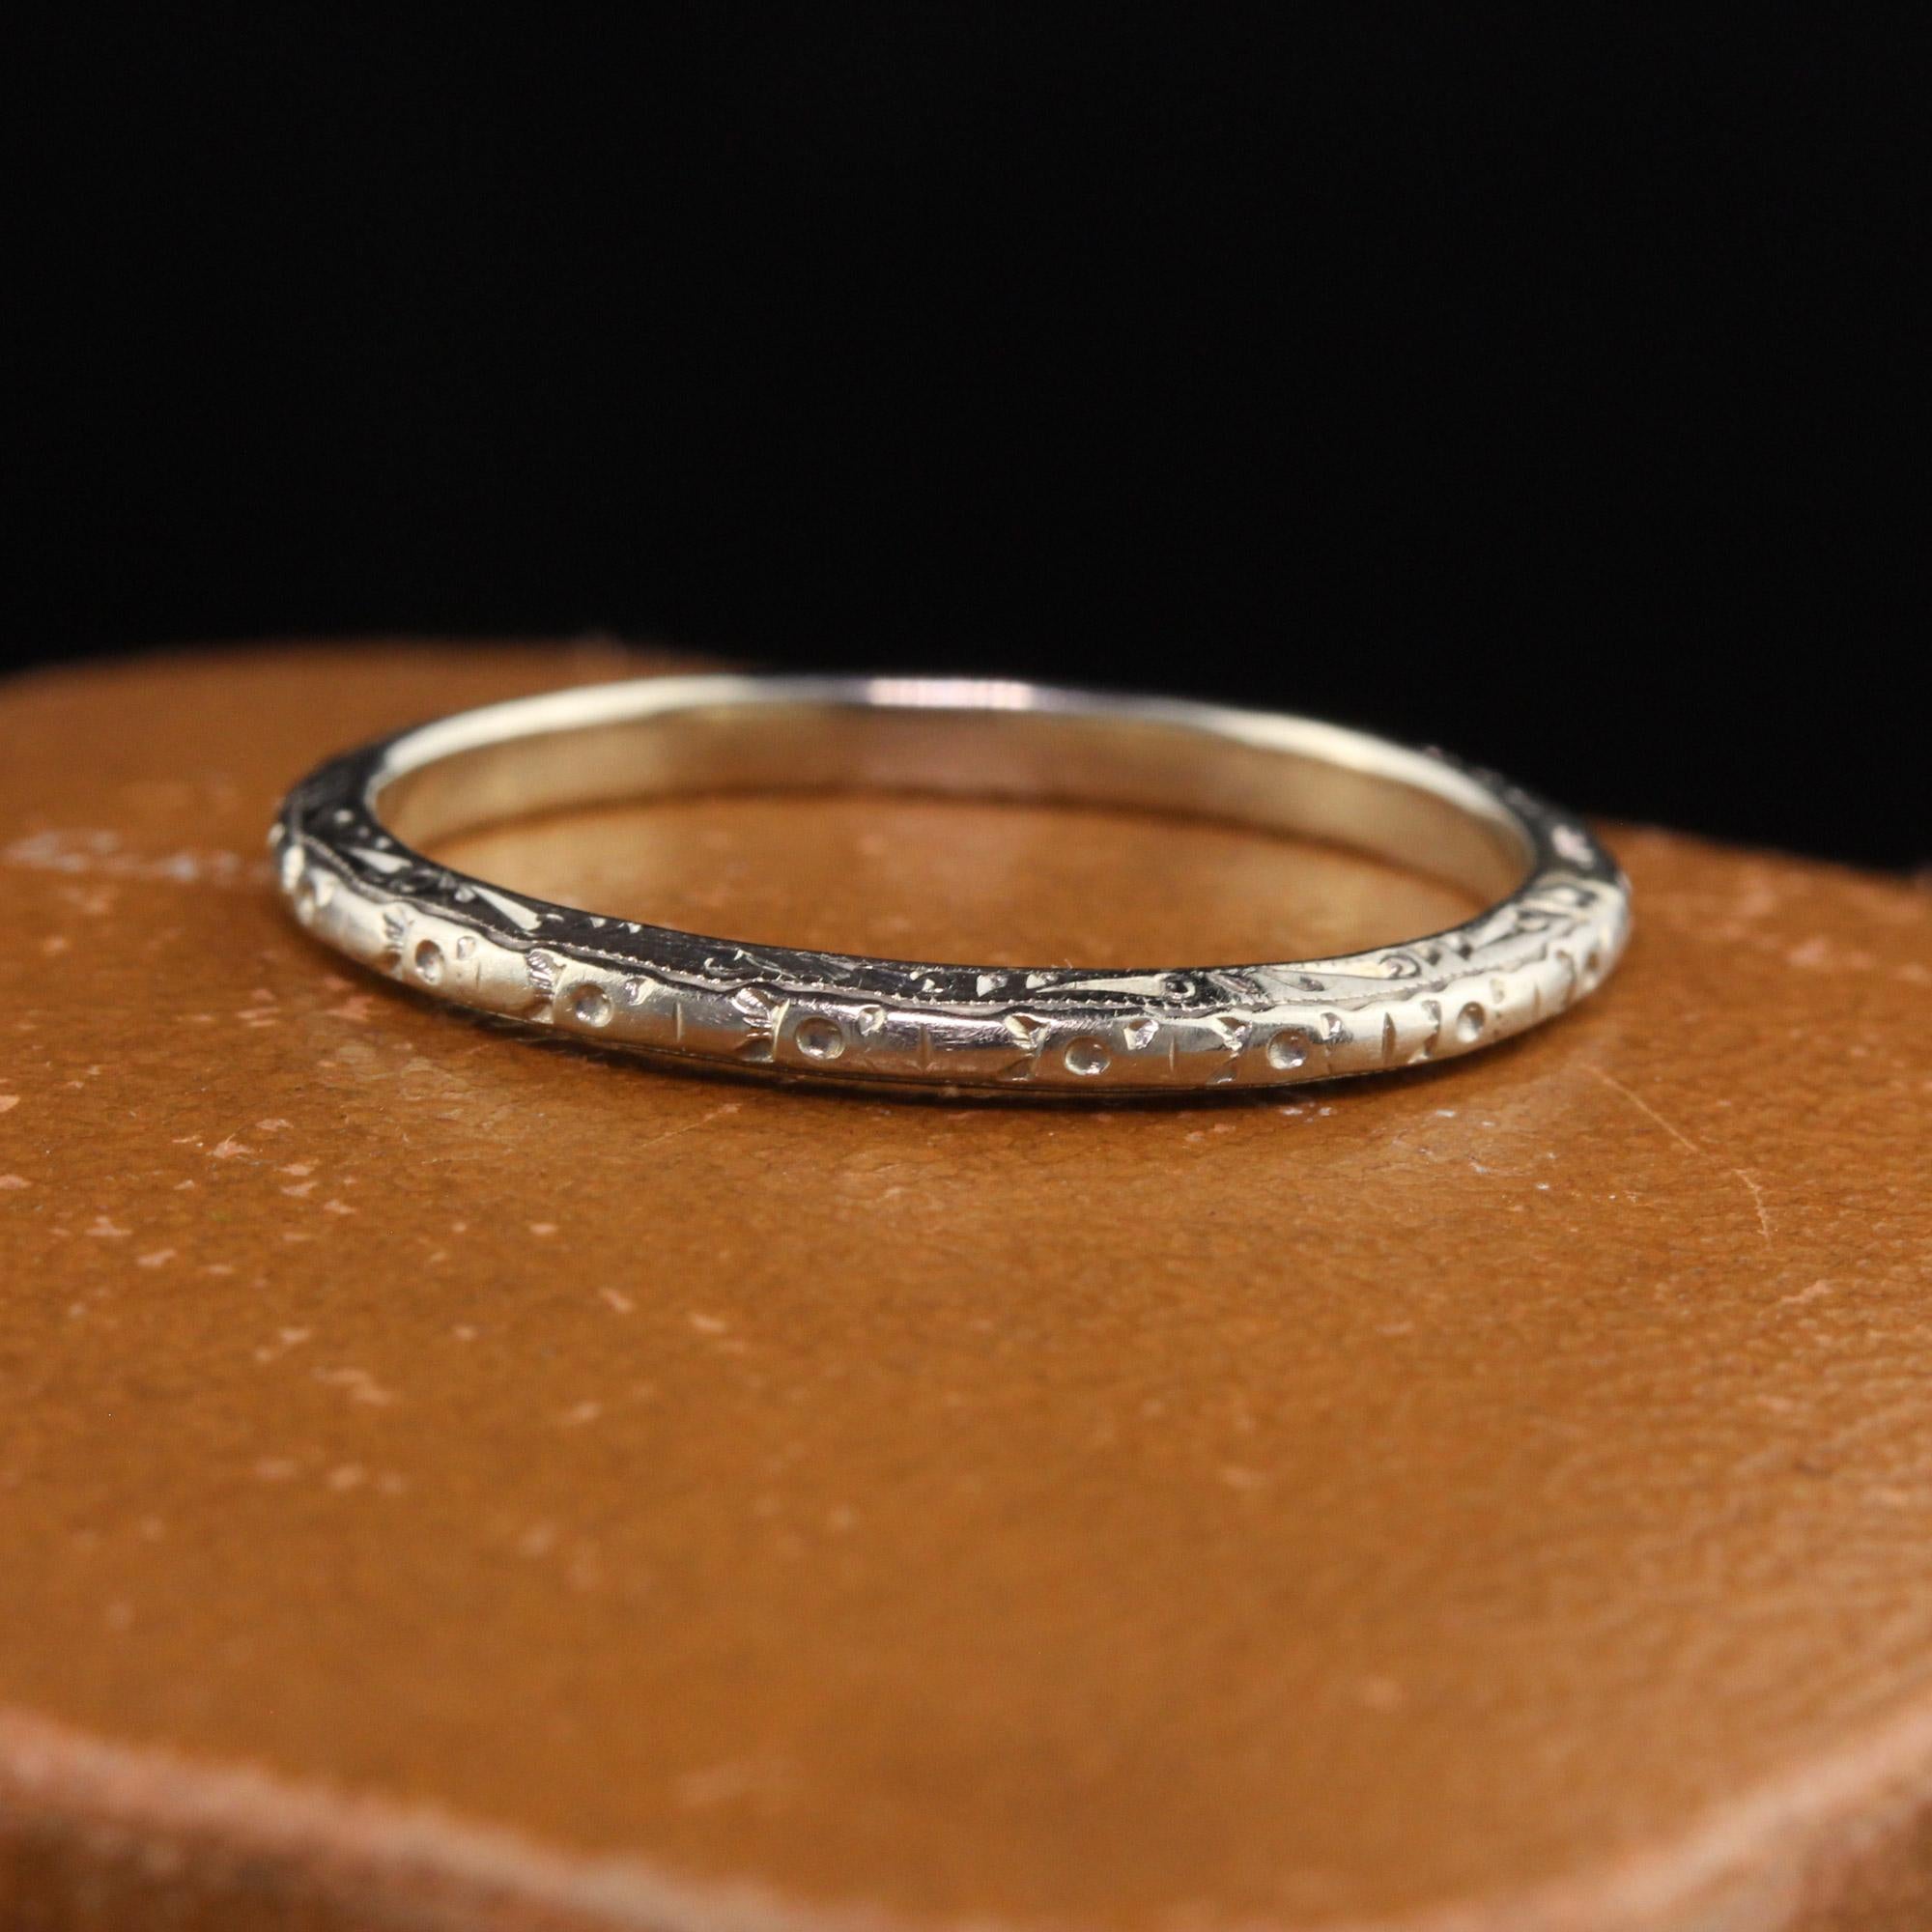 Beautiful Antique Art Deco 18K White Gold Engraved Wedding Band - Size 6 1/2. This beautiful wedding band is crafted in 18k white gold. The band is nicely engraved around the entire ring and is in good condition.

Item #R1266

Metal: 18K White